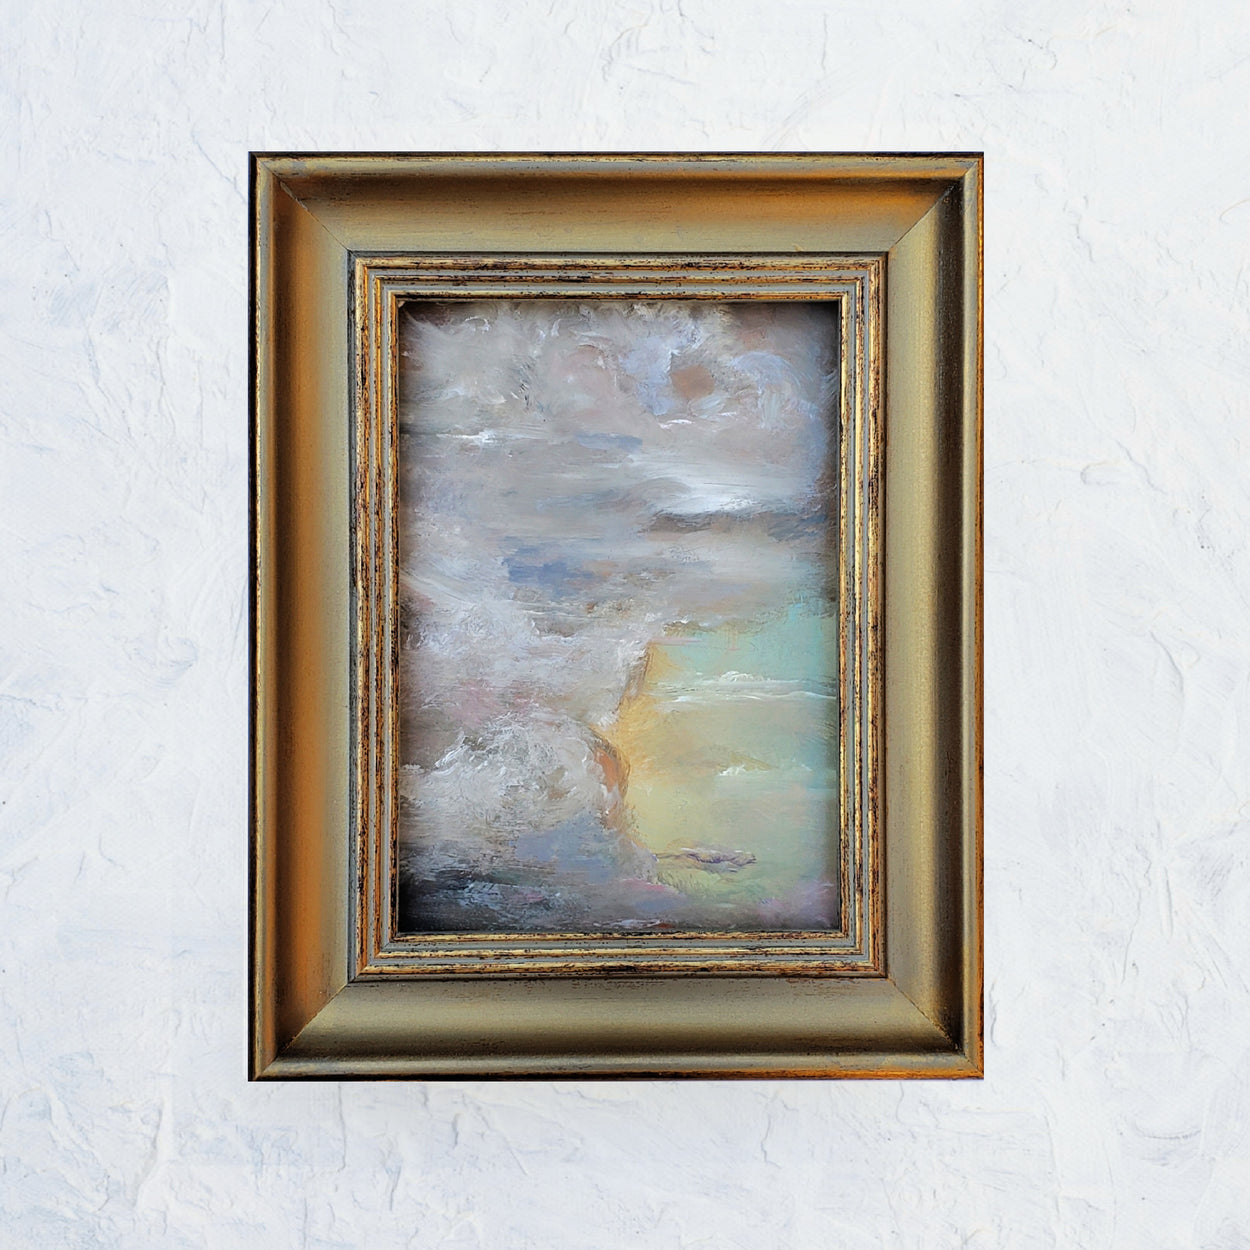 Vintage style frame with vintage looking clouds in soft warm colors and glowing with gold and aqua... 5x7 original oil painting